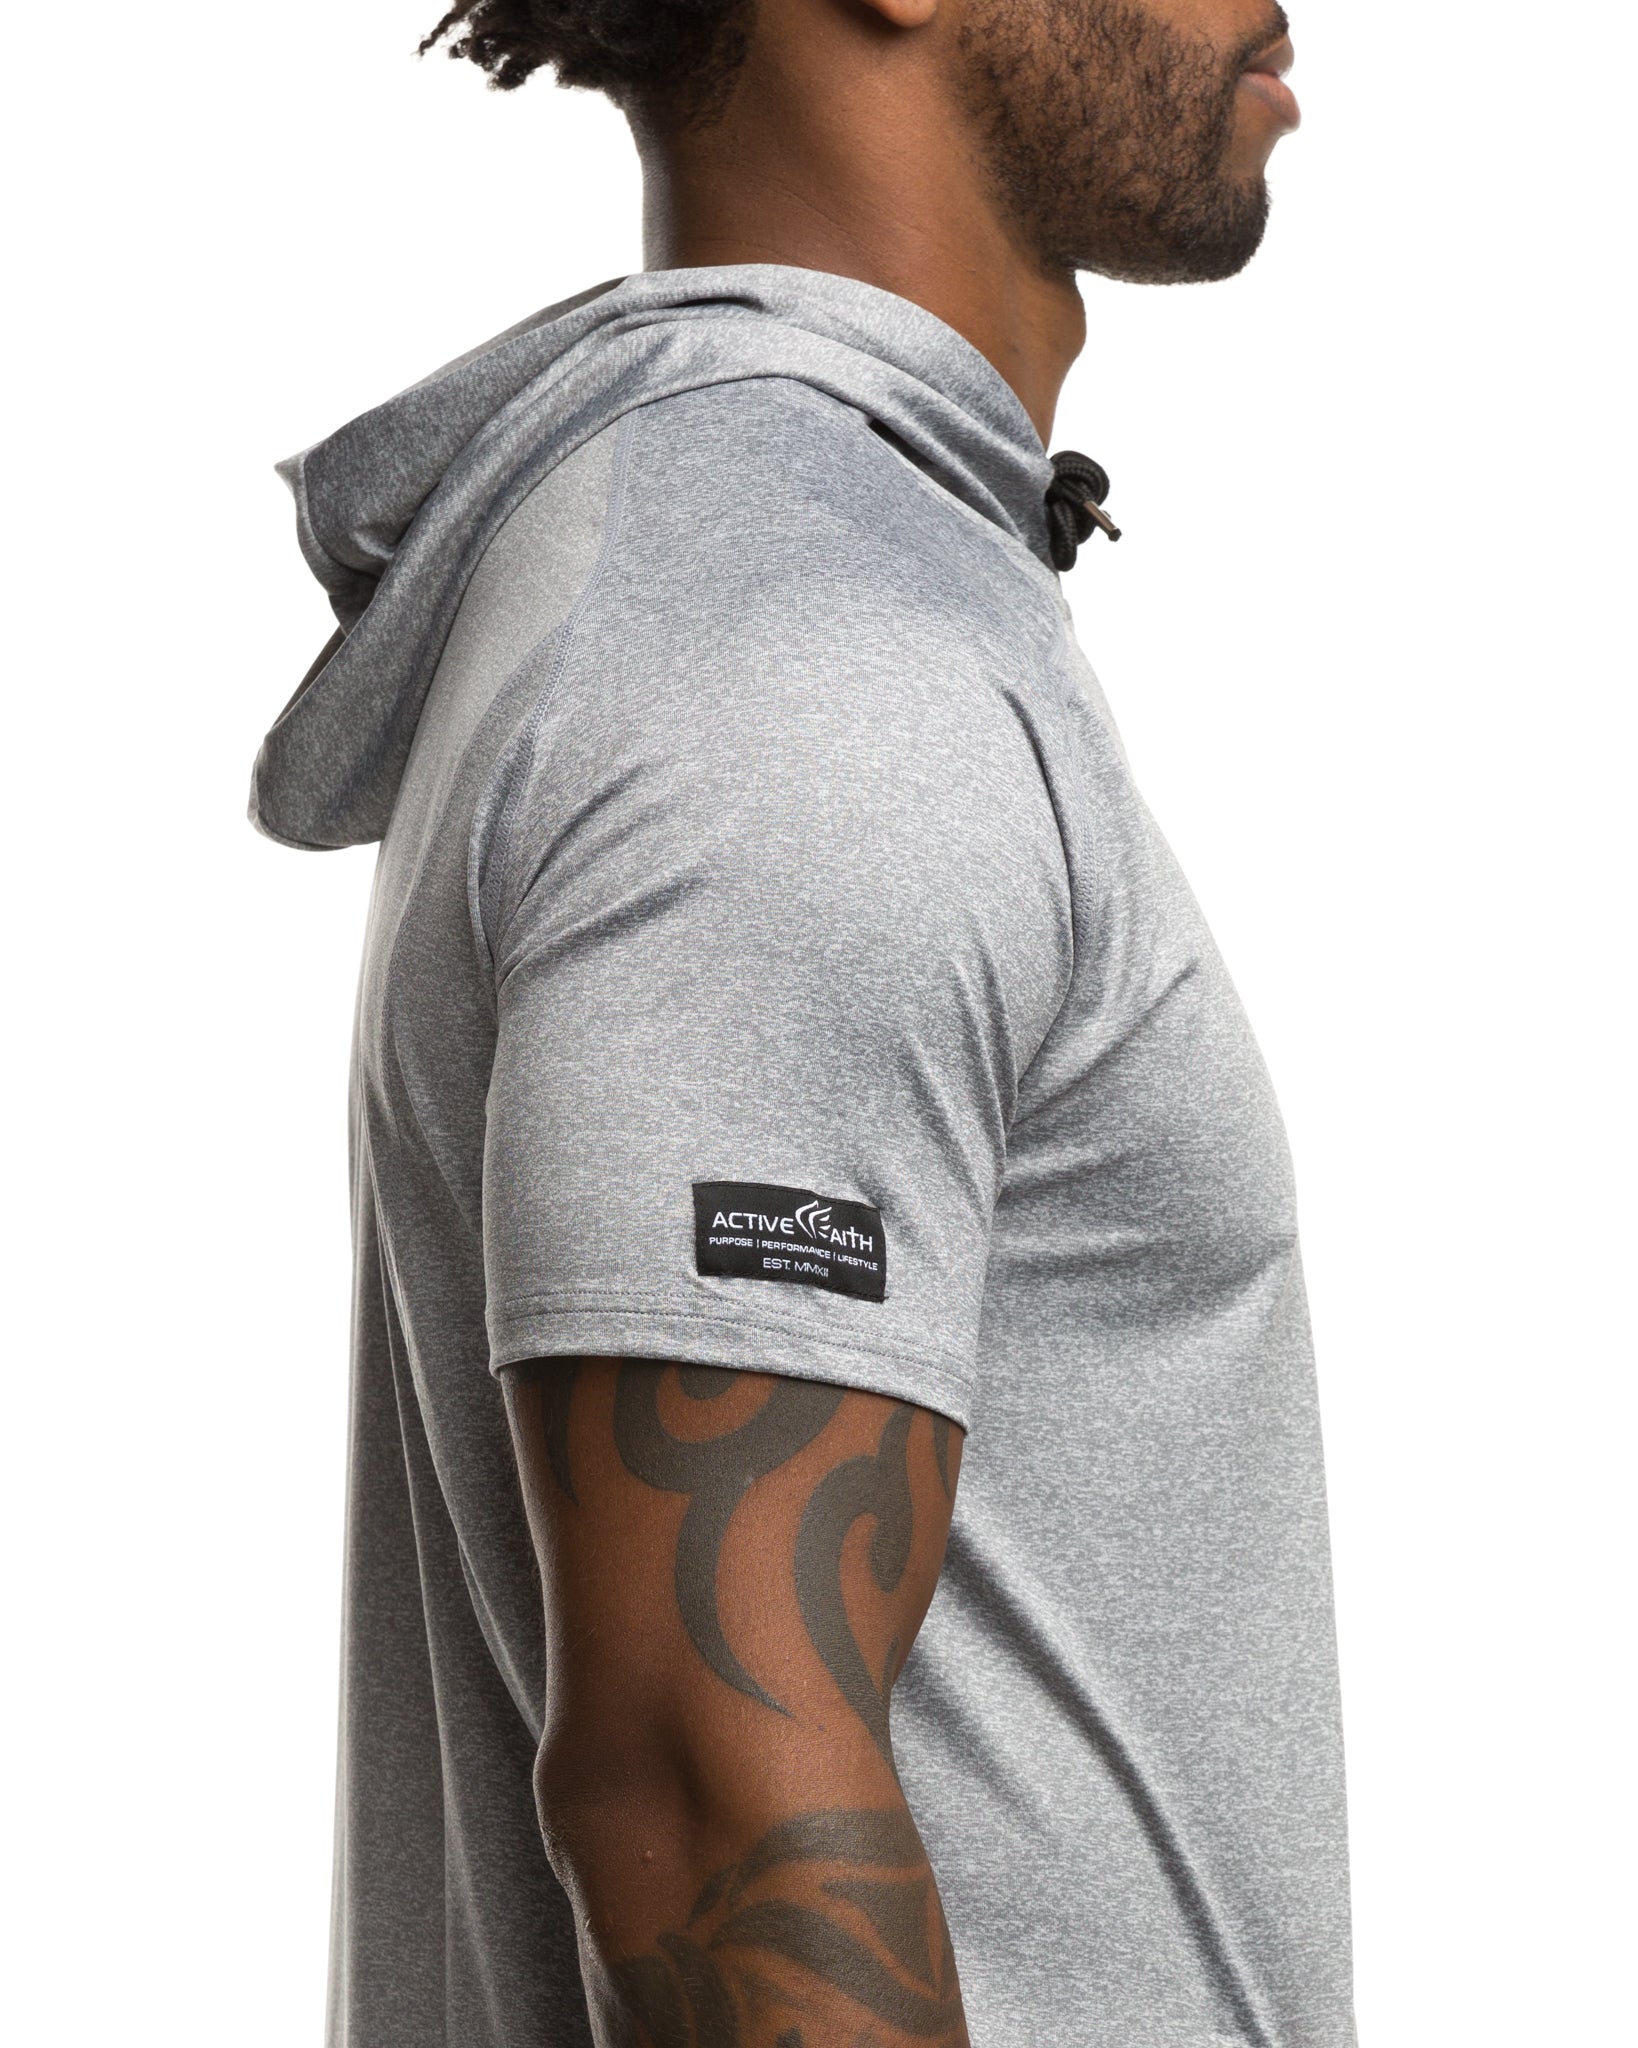 Men's Active Faith Performance Tech Short Sleeve Hoodie in Charcoal Black Color